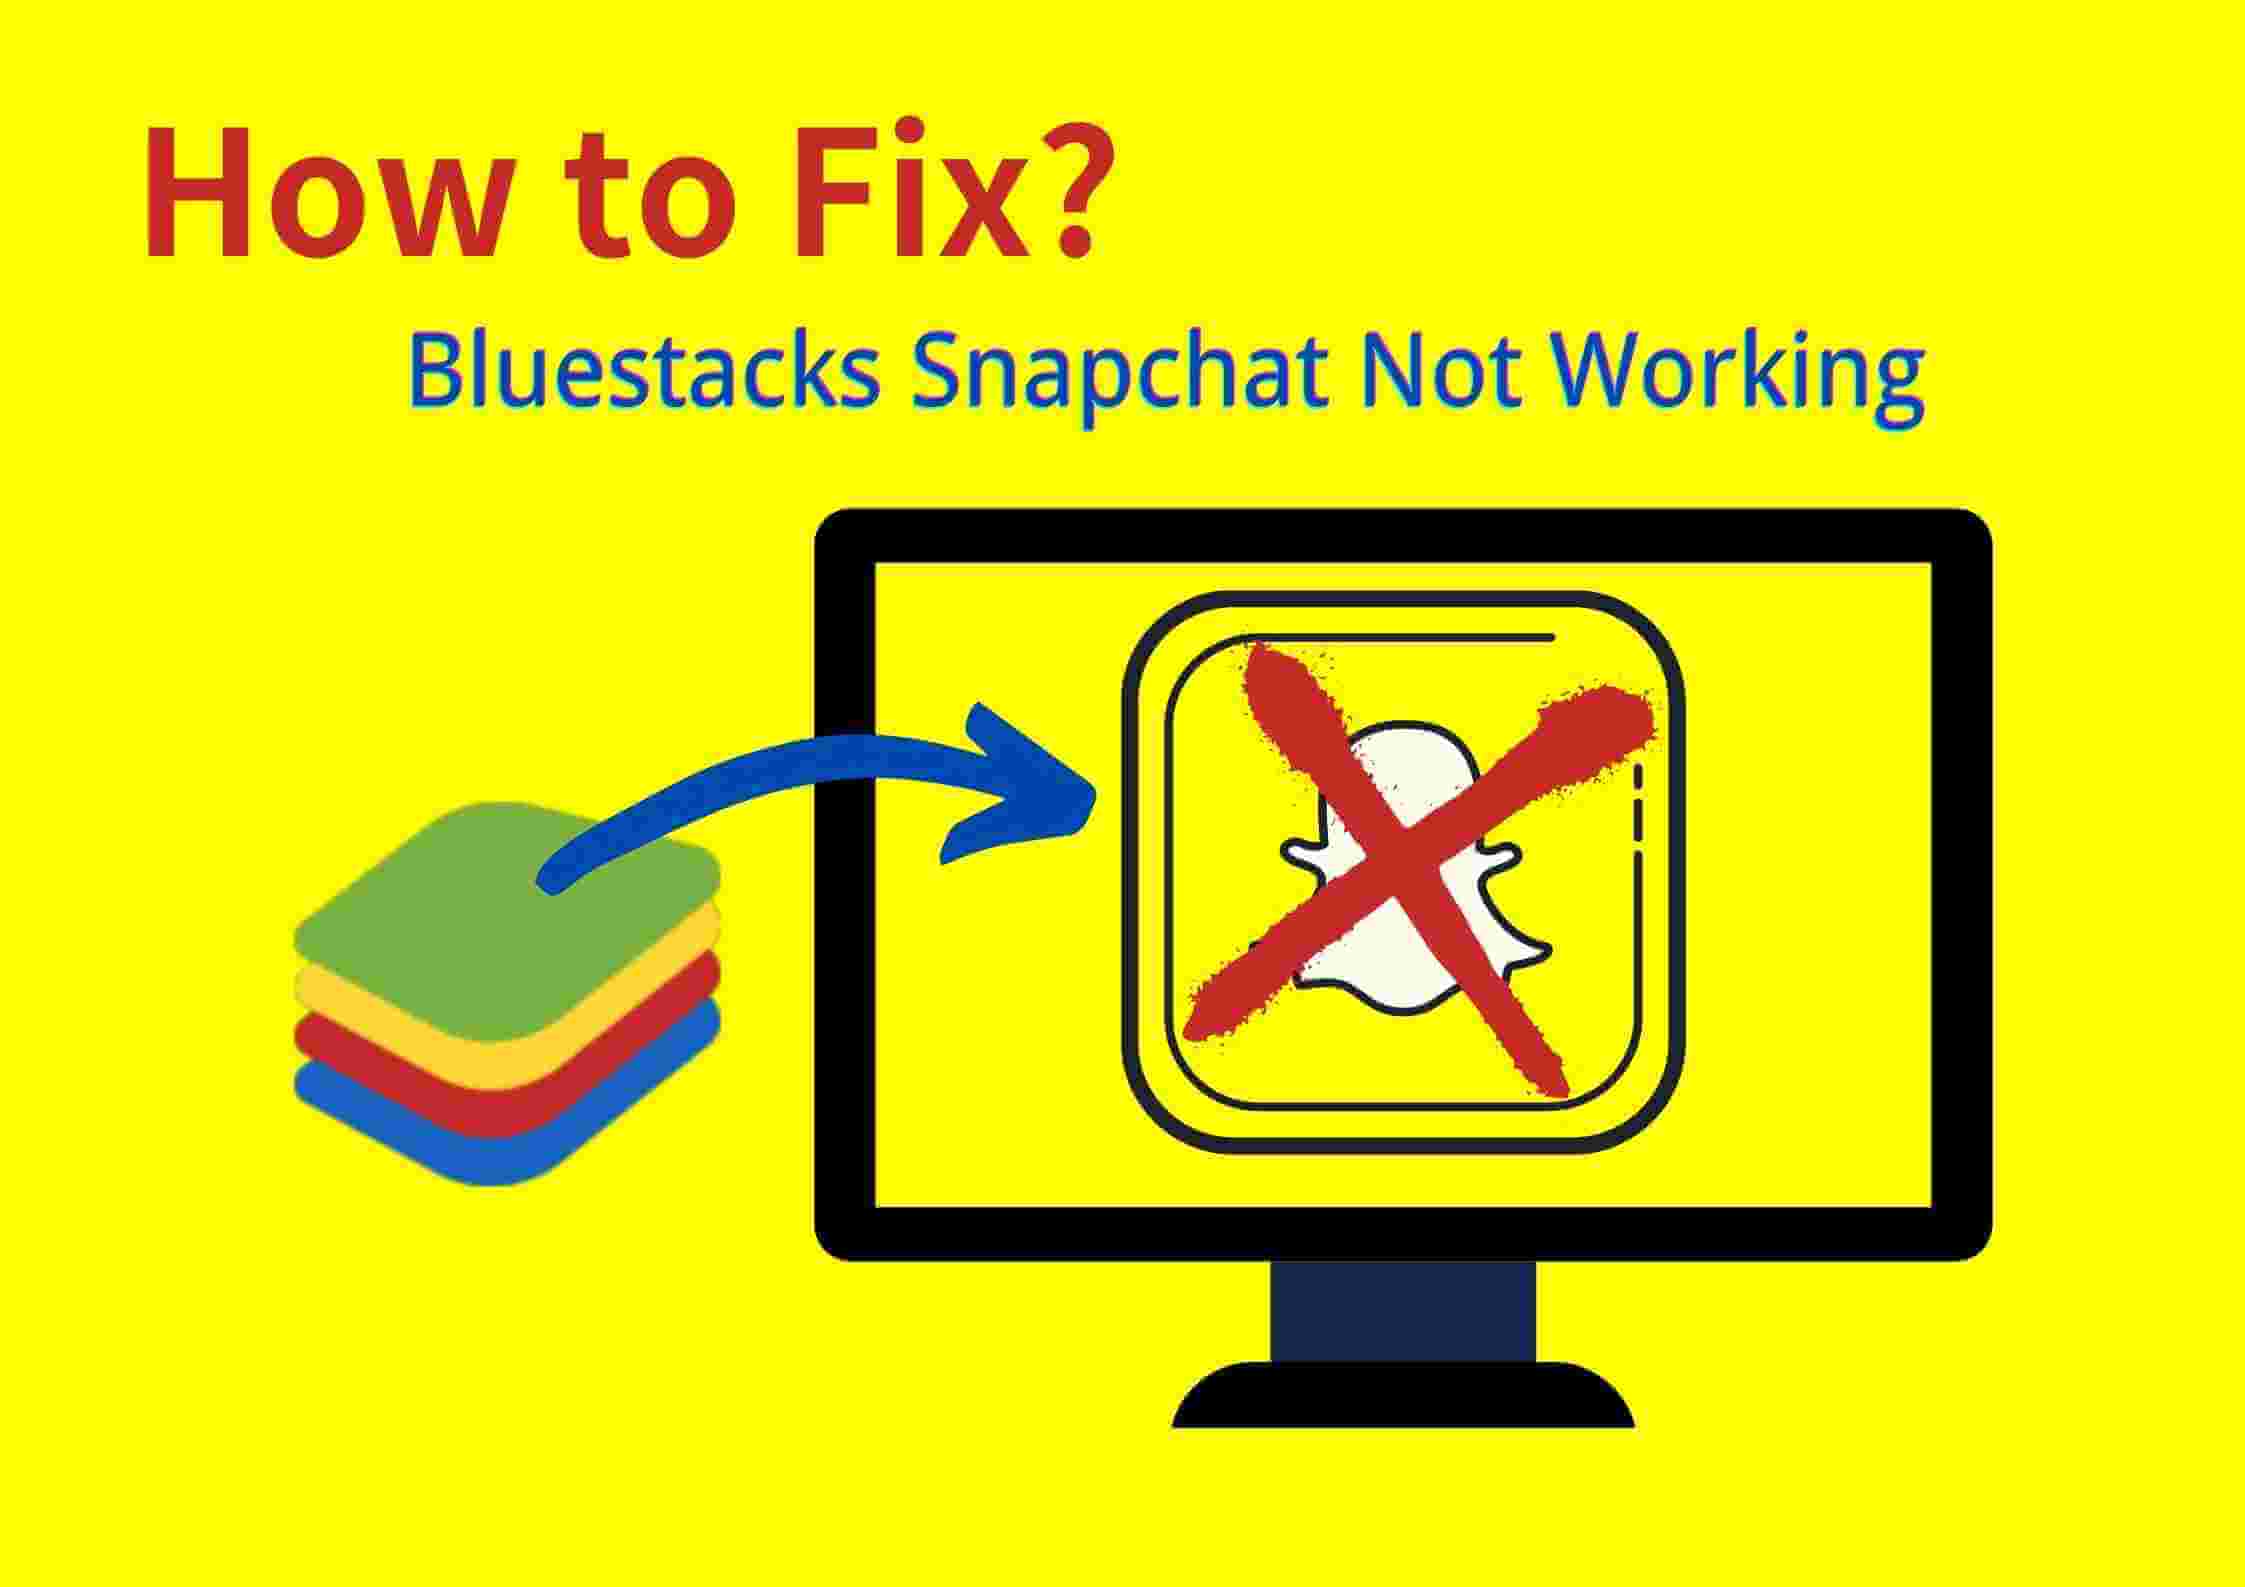 Overcome Snapchat issues with Bluestacks
Find fixes for Bluestacks Snapchat problems